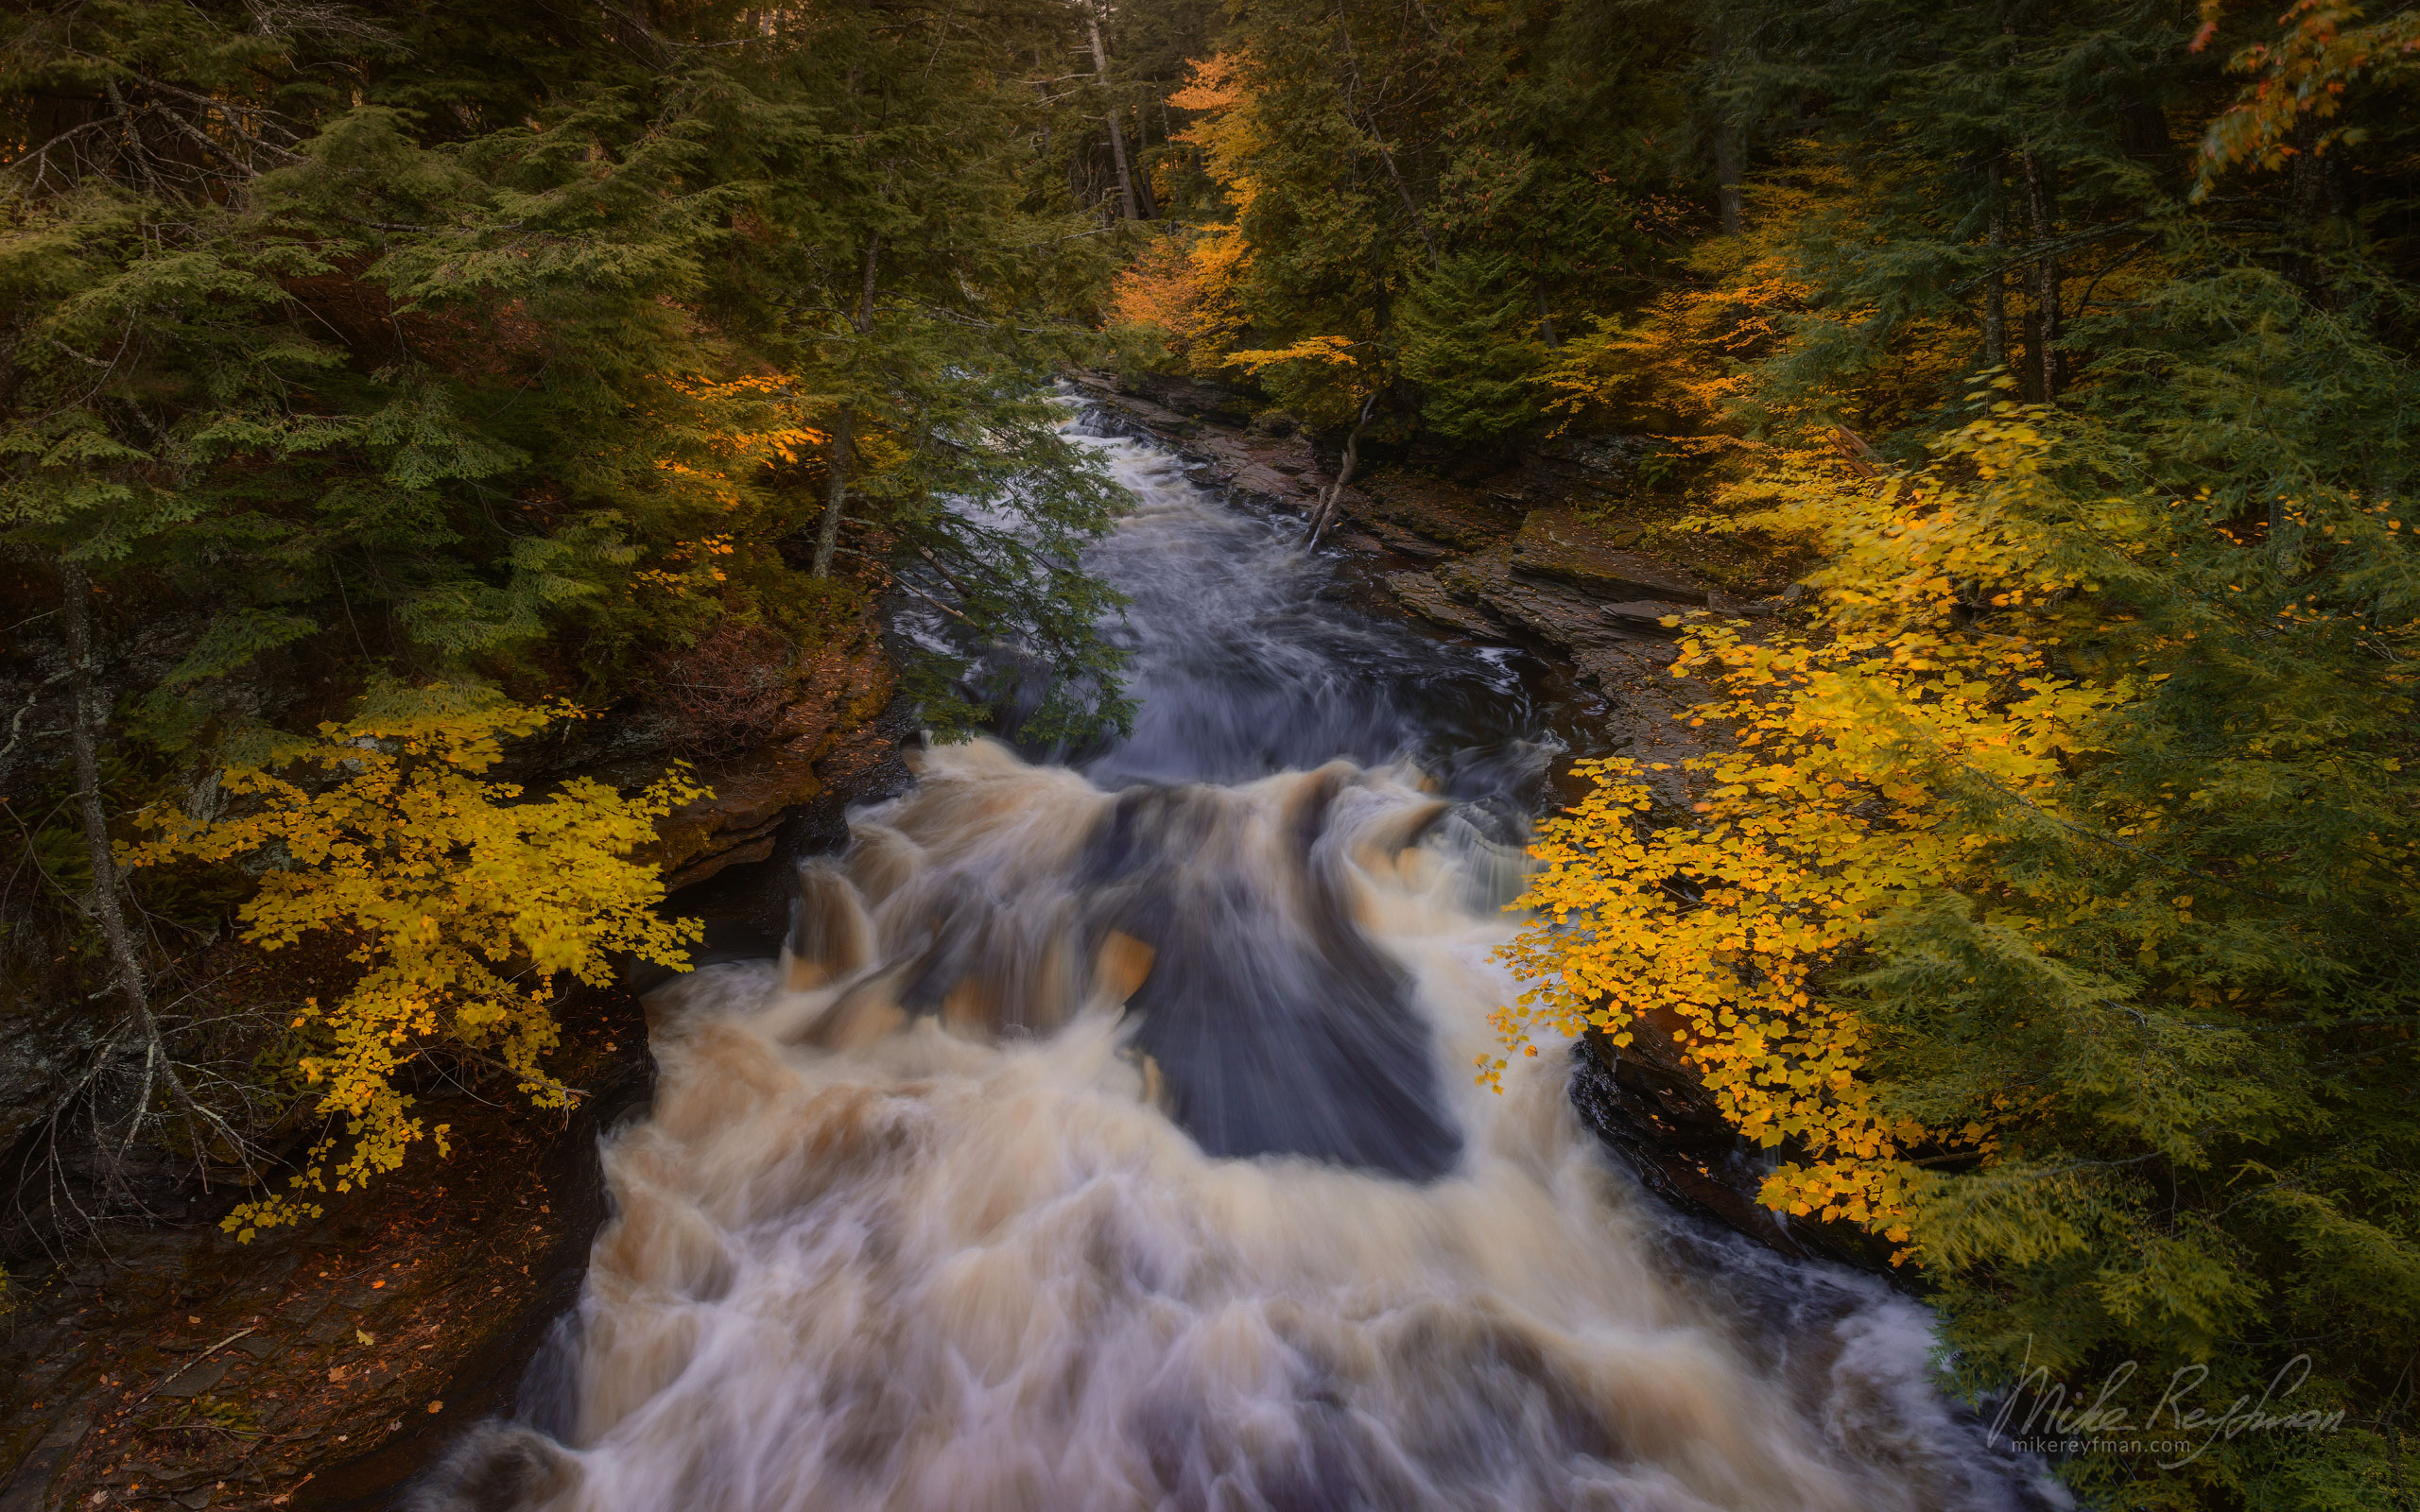 Presque Isle River, Porcupine Mountains, Upper Peninsula, Michigan, USA. UP-MI_025_ZRA7472.jpg - Michigan's Upper Peninsula - the best destination in US for fall colors. - Mike Reyfman Photography